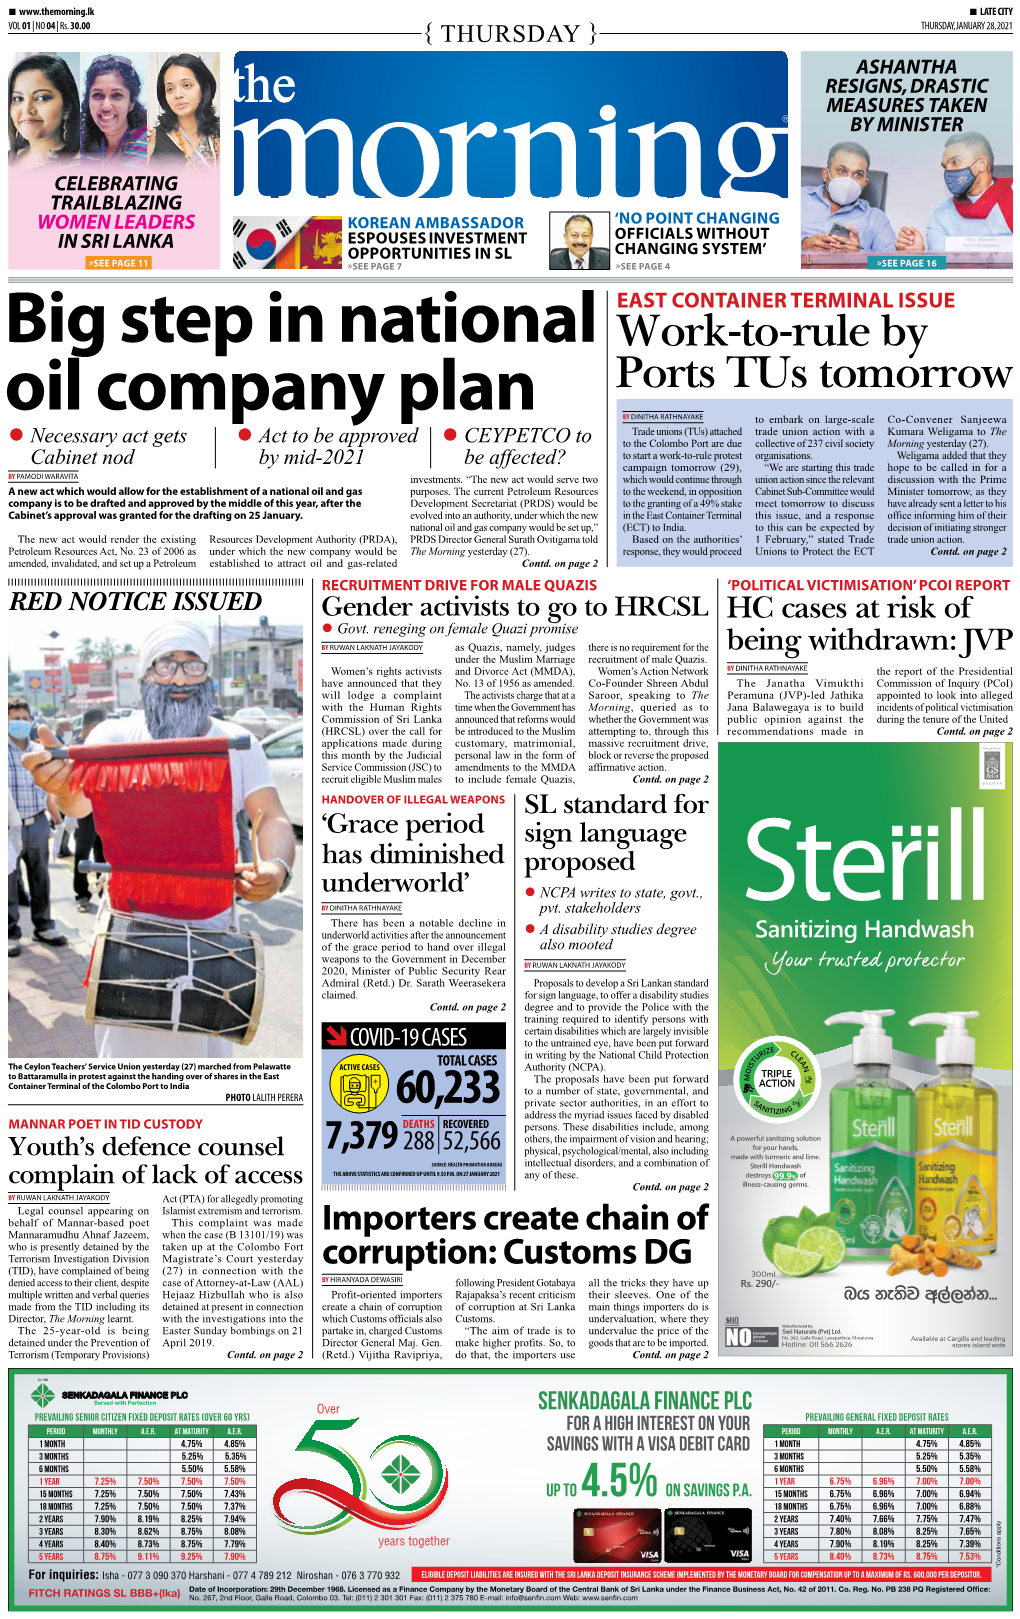 Big Step in National Oil Company Plan